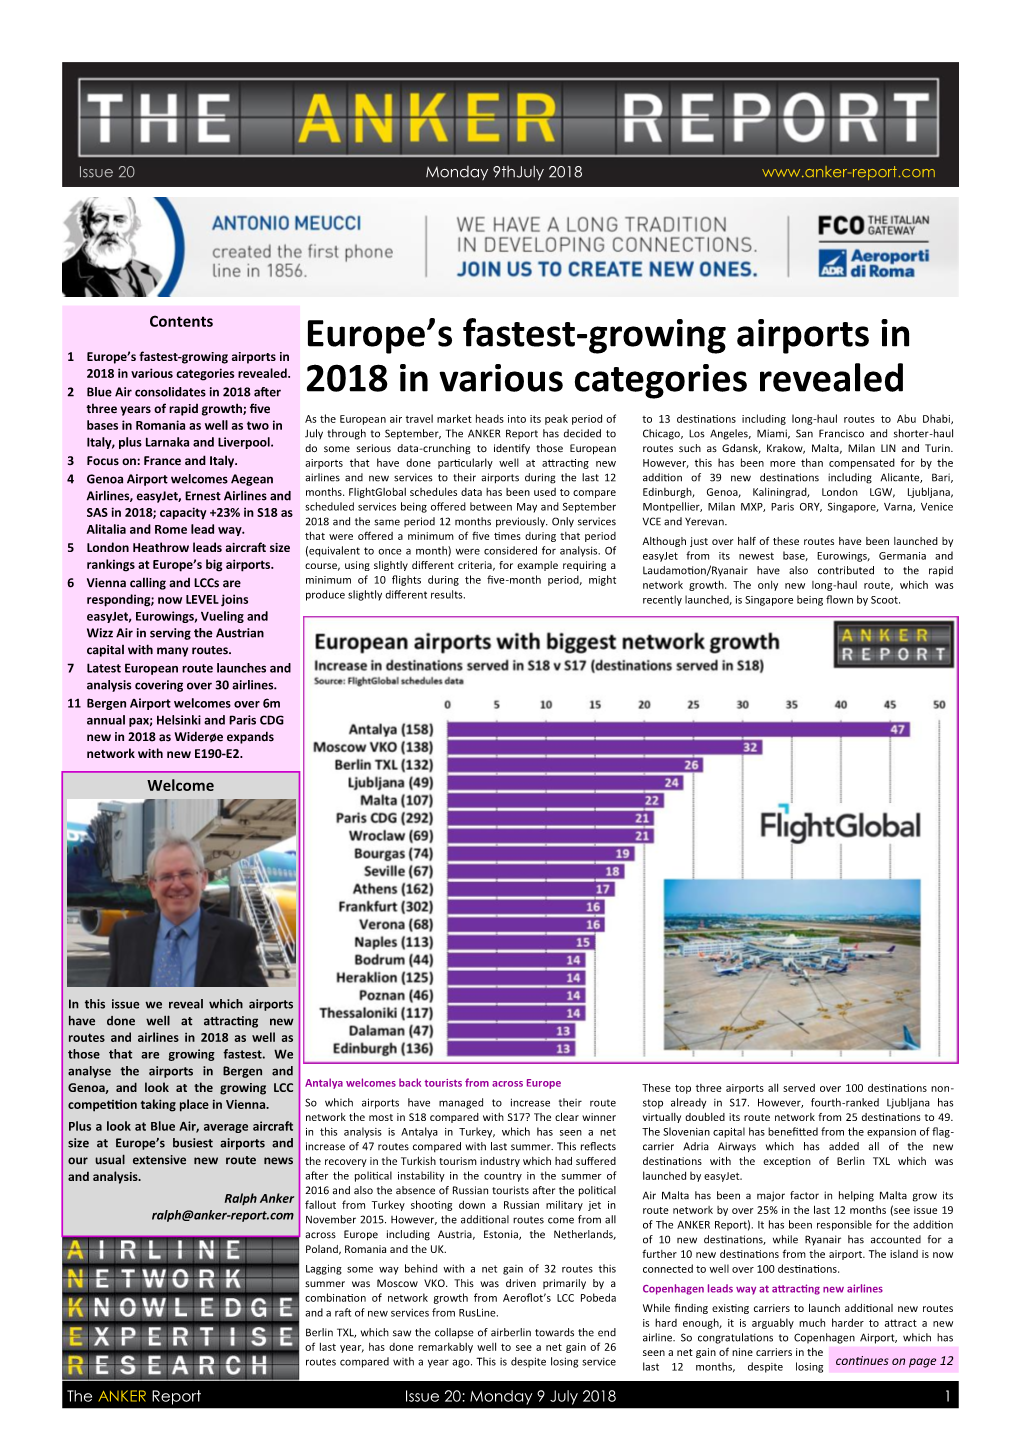 Europe's Fastest-Growing Airports in 2018 in Various Categories Revealed